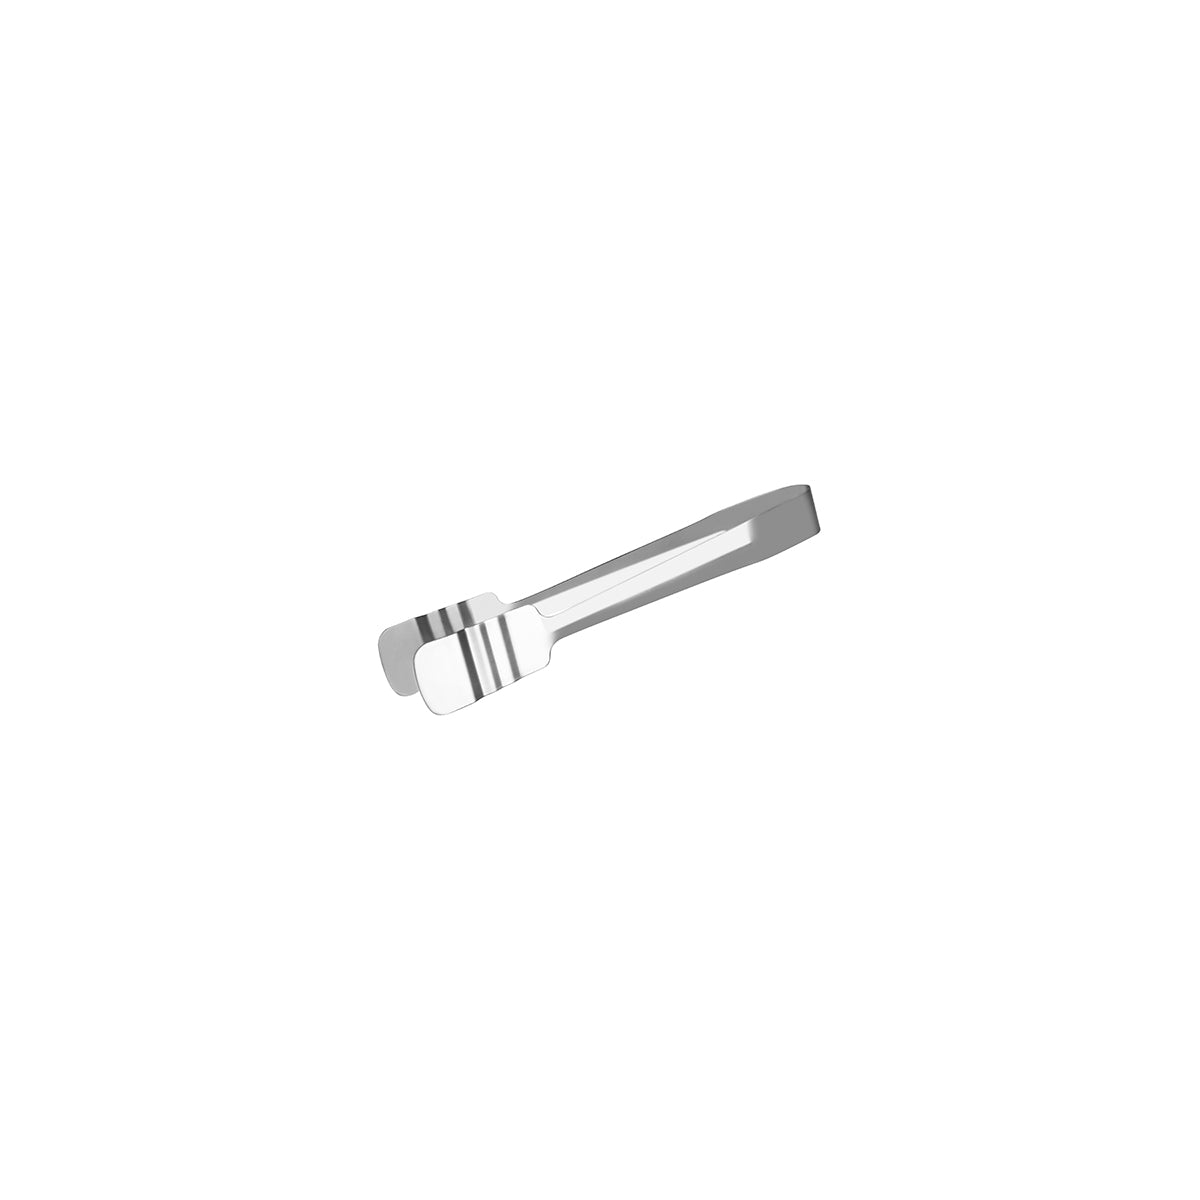 70212 Chef Inox Serving Tong Stainless Steel 240mm Tomkin Australia Hospitality Supplies